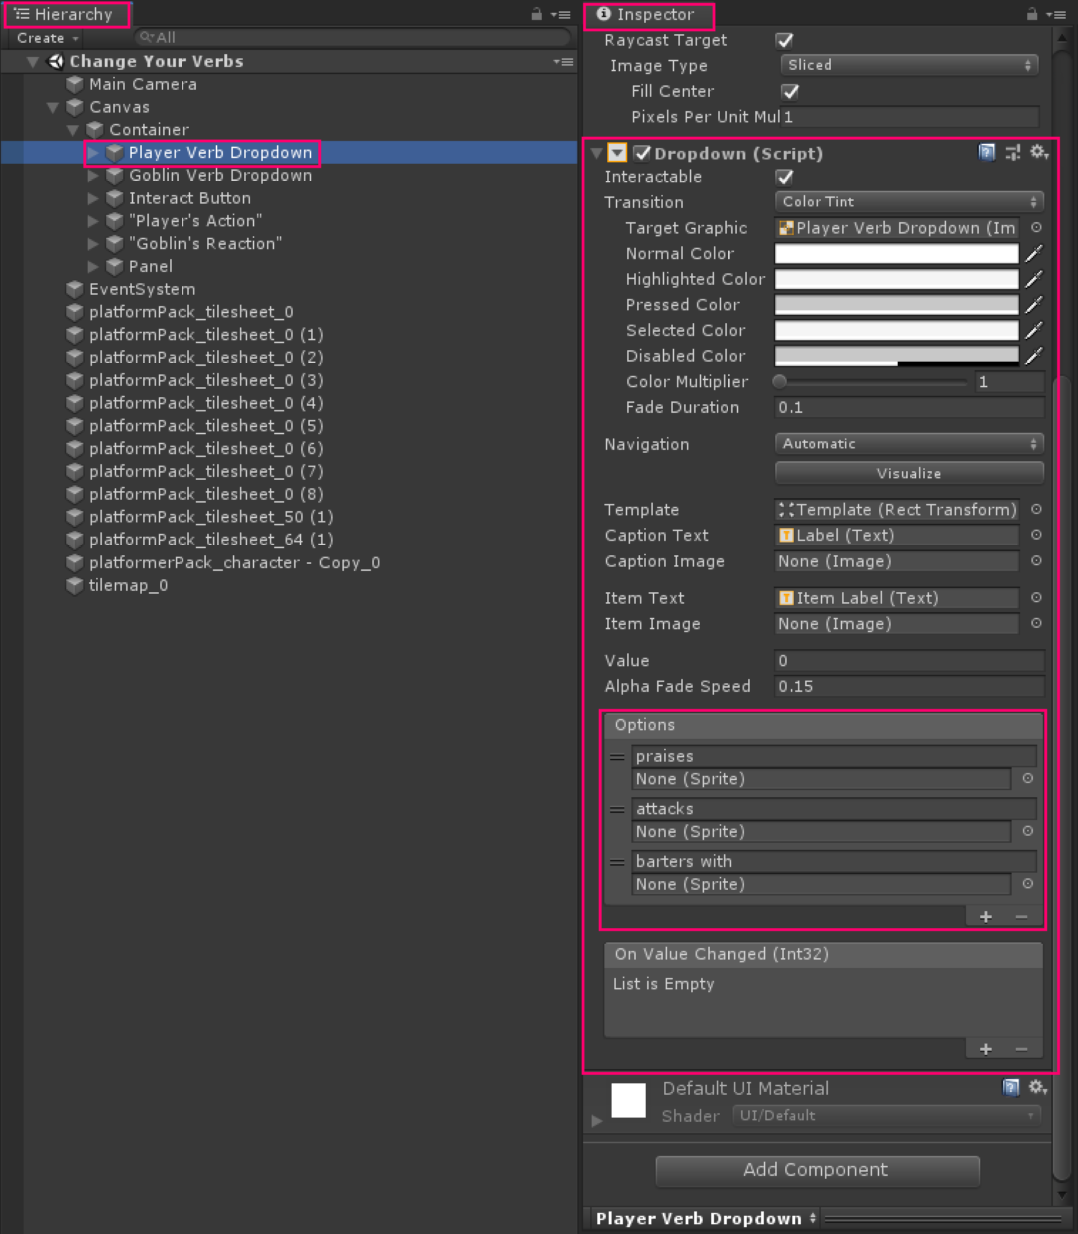 Location of dropdown UI elements in the unity hierarchy, and demonstration of how to ad elements in the inspector